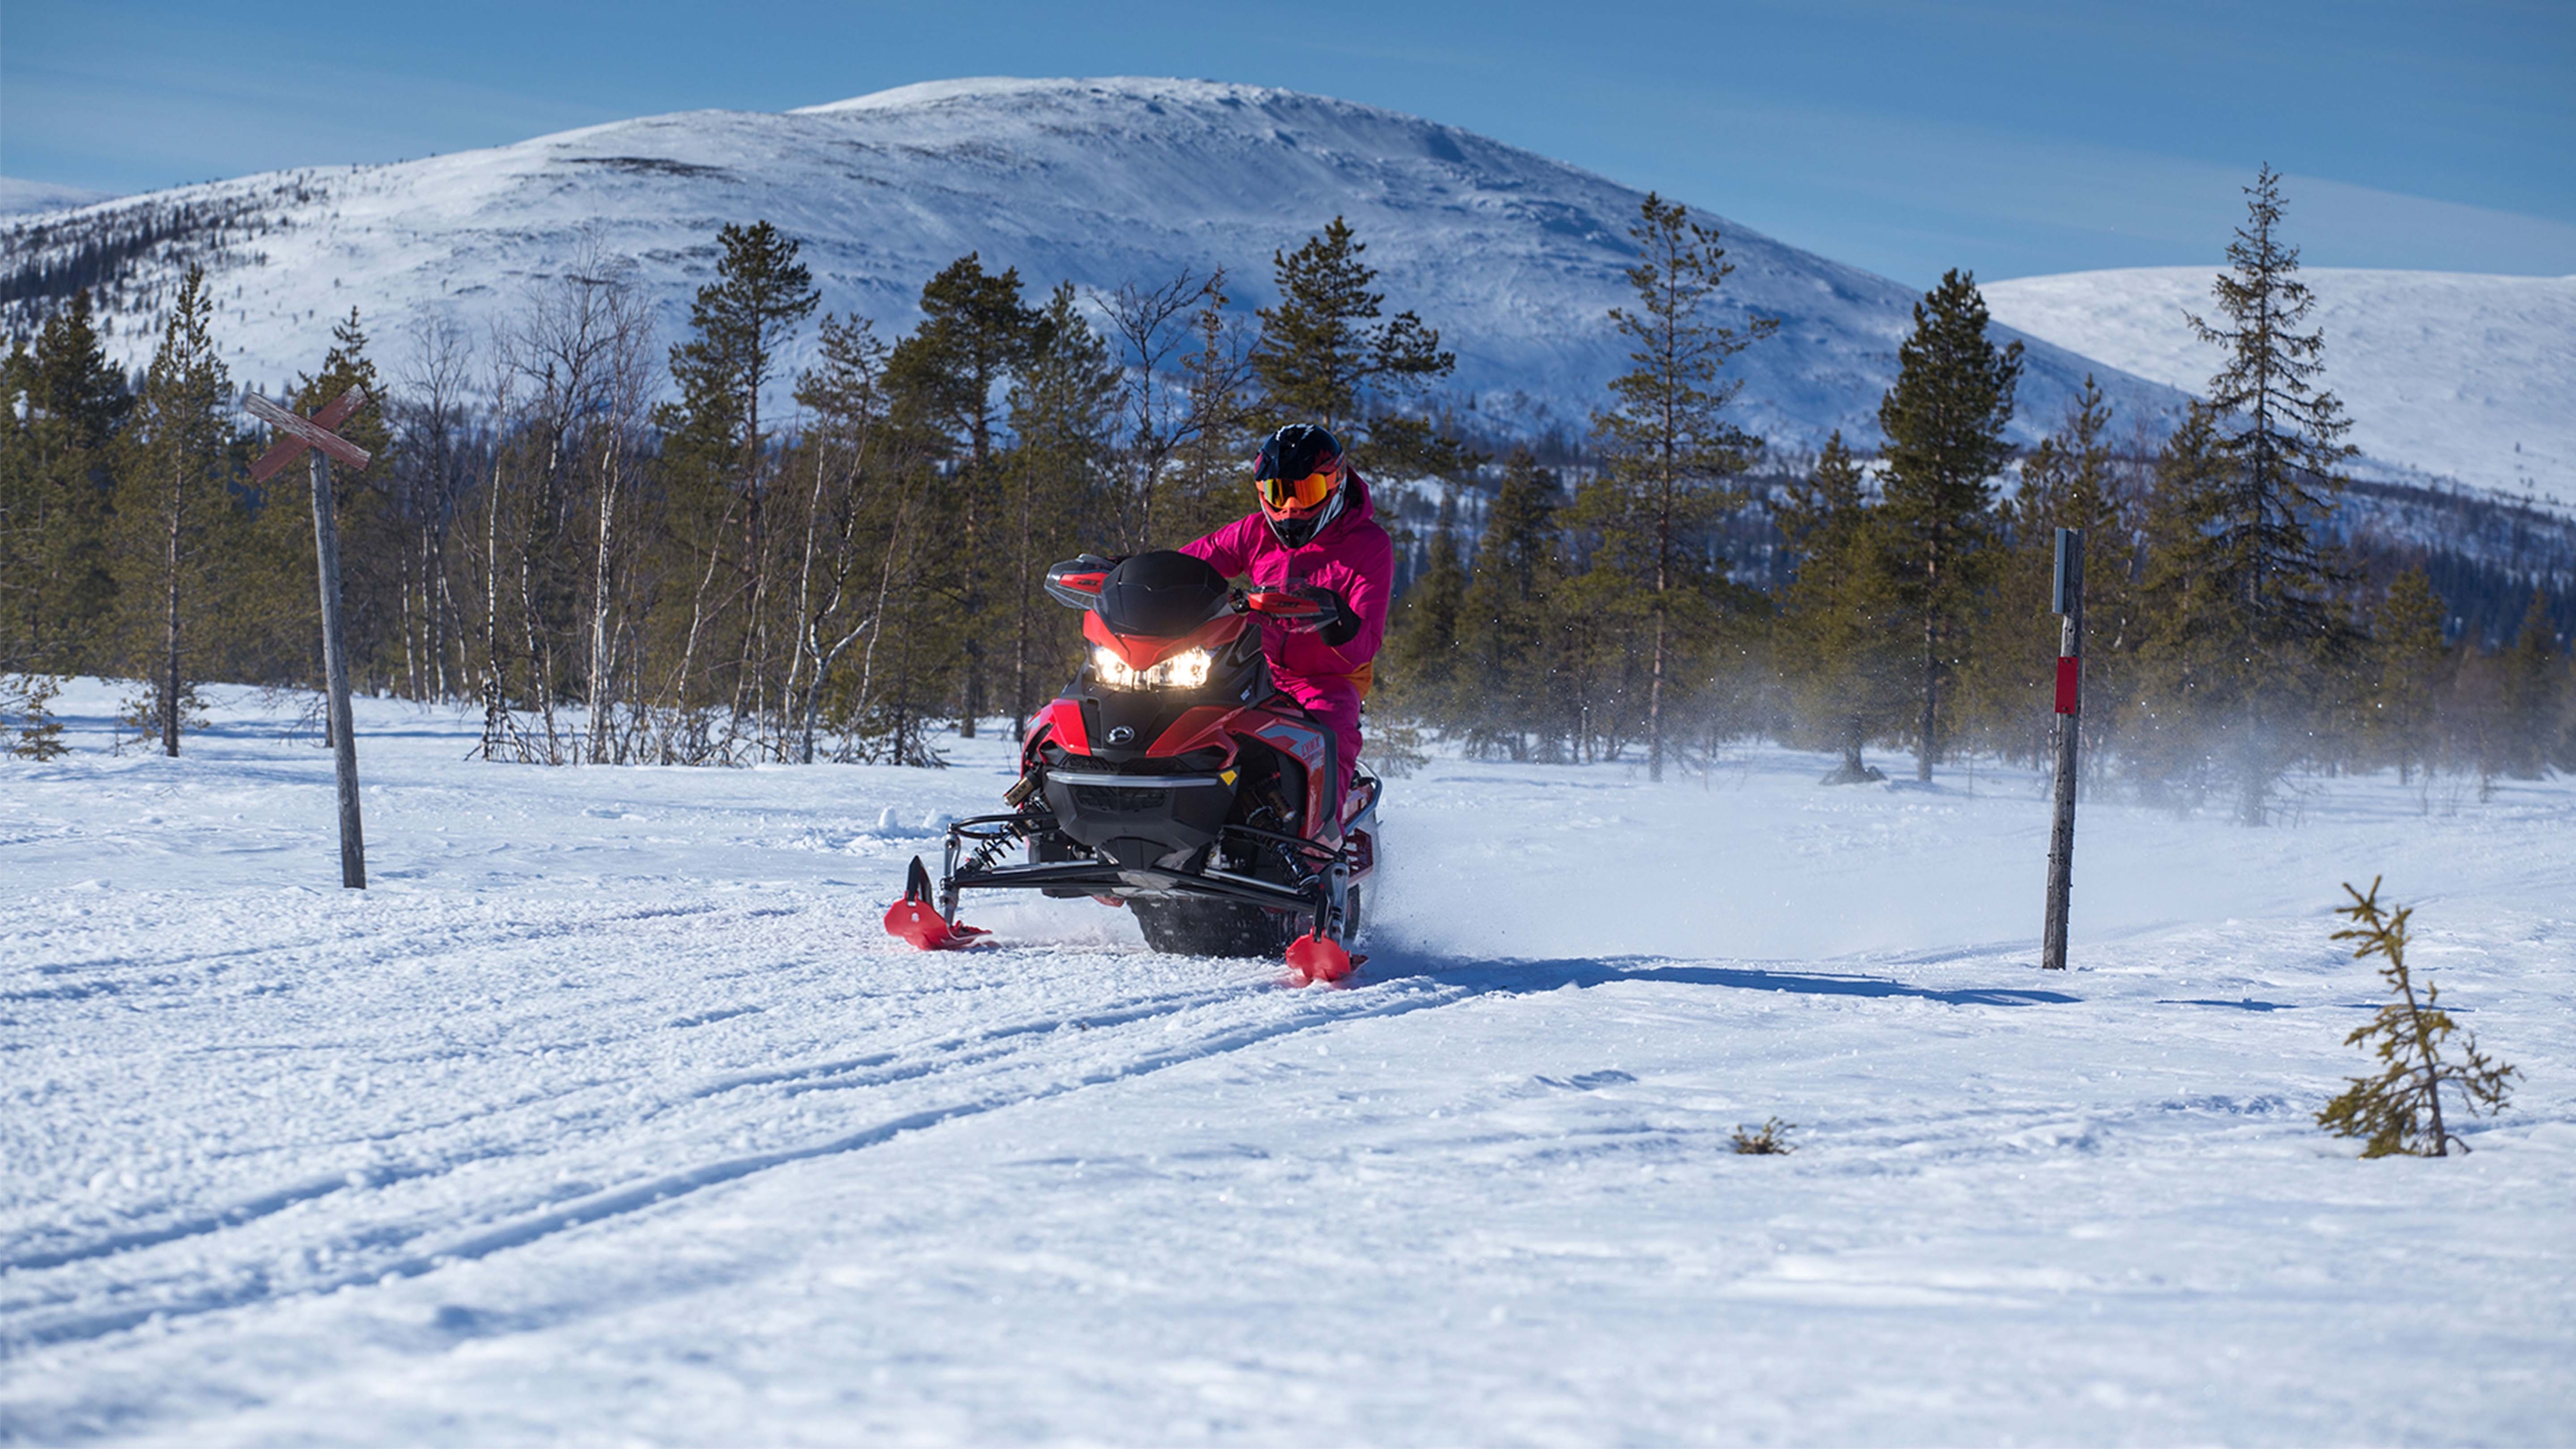 Emma Kimiläinen riding on mountain view trail with Lynx Rave RE snowmobile